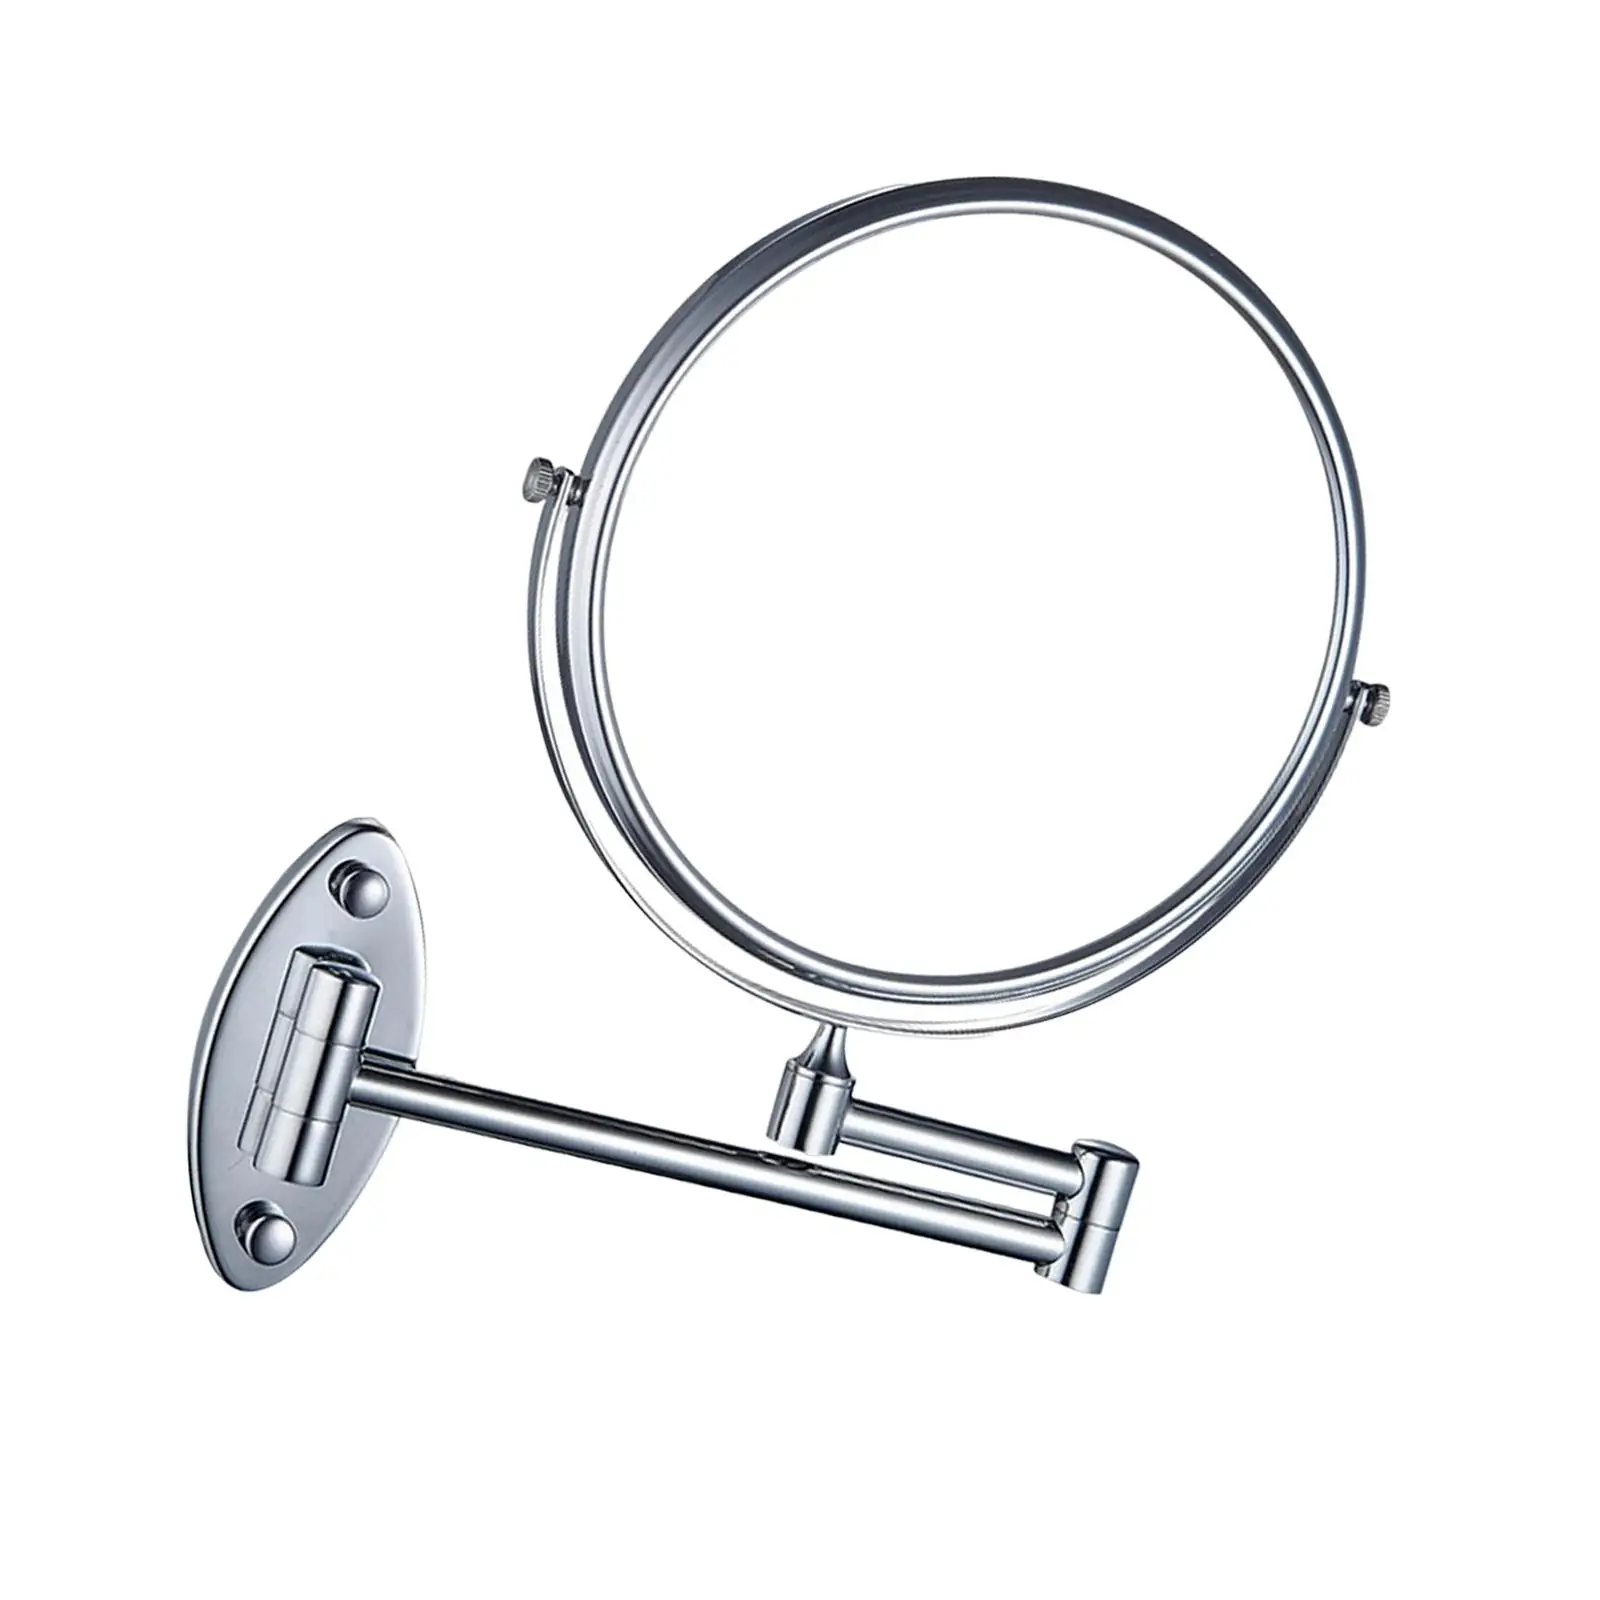 8 Inches Wall Mounted Makeup Makeup  Polished Chrome Finished 3x Magnification Shaving Mirrors for Bathroom Hotel